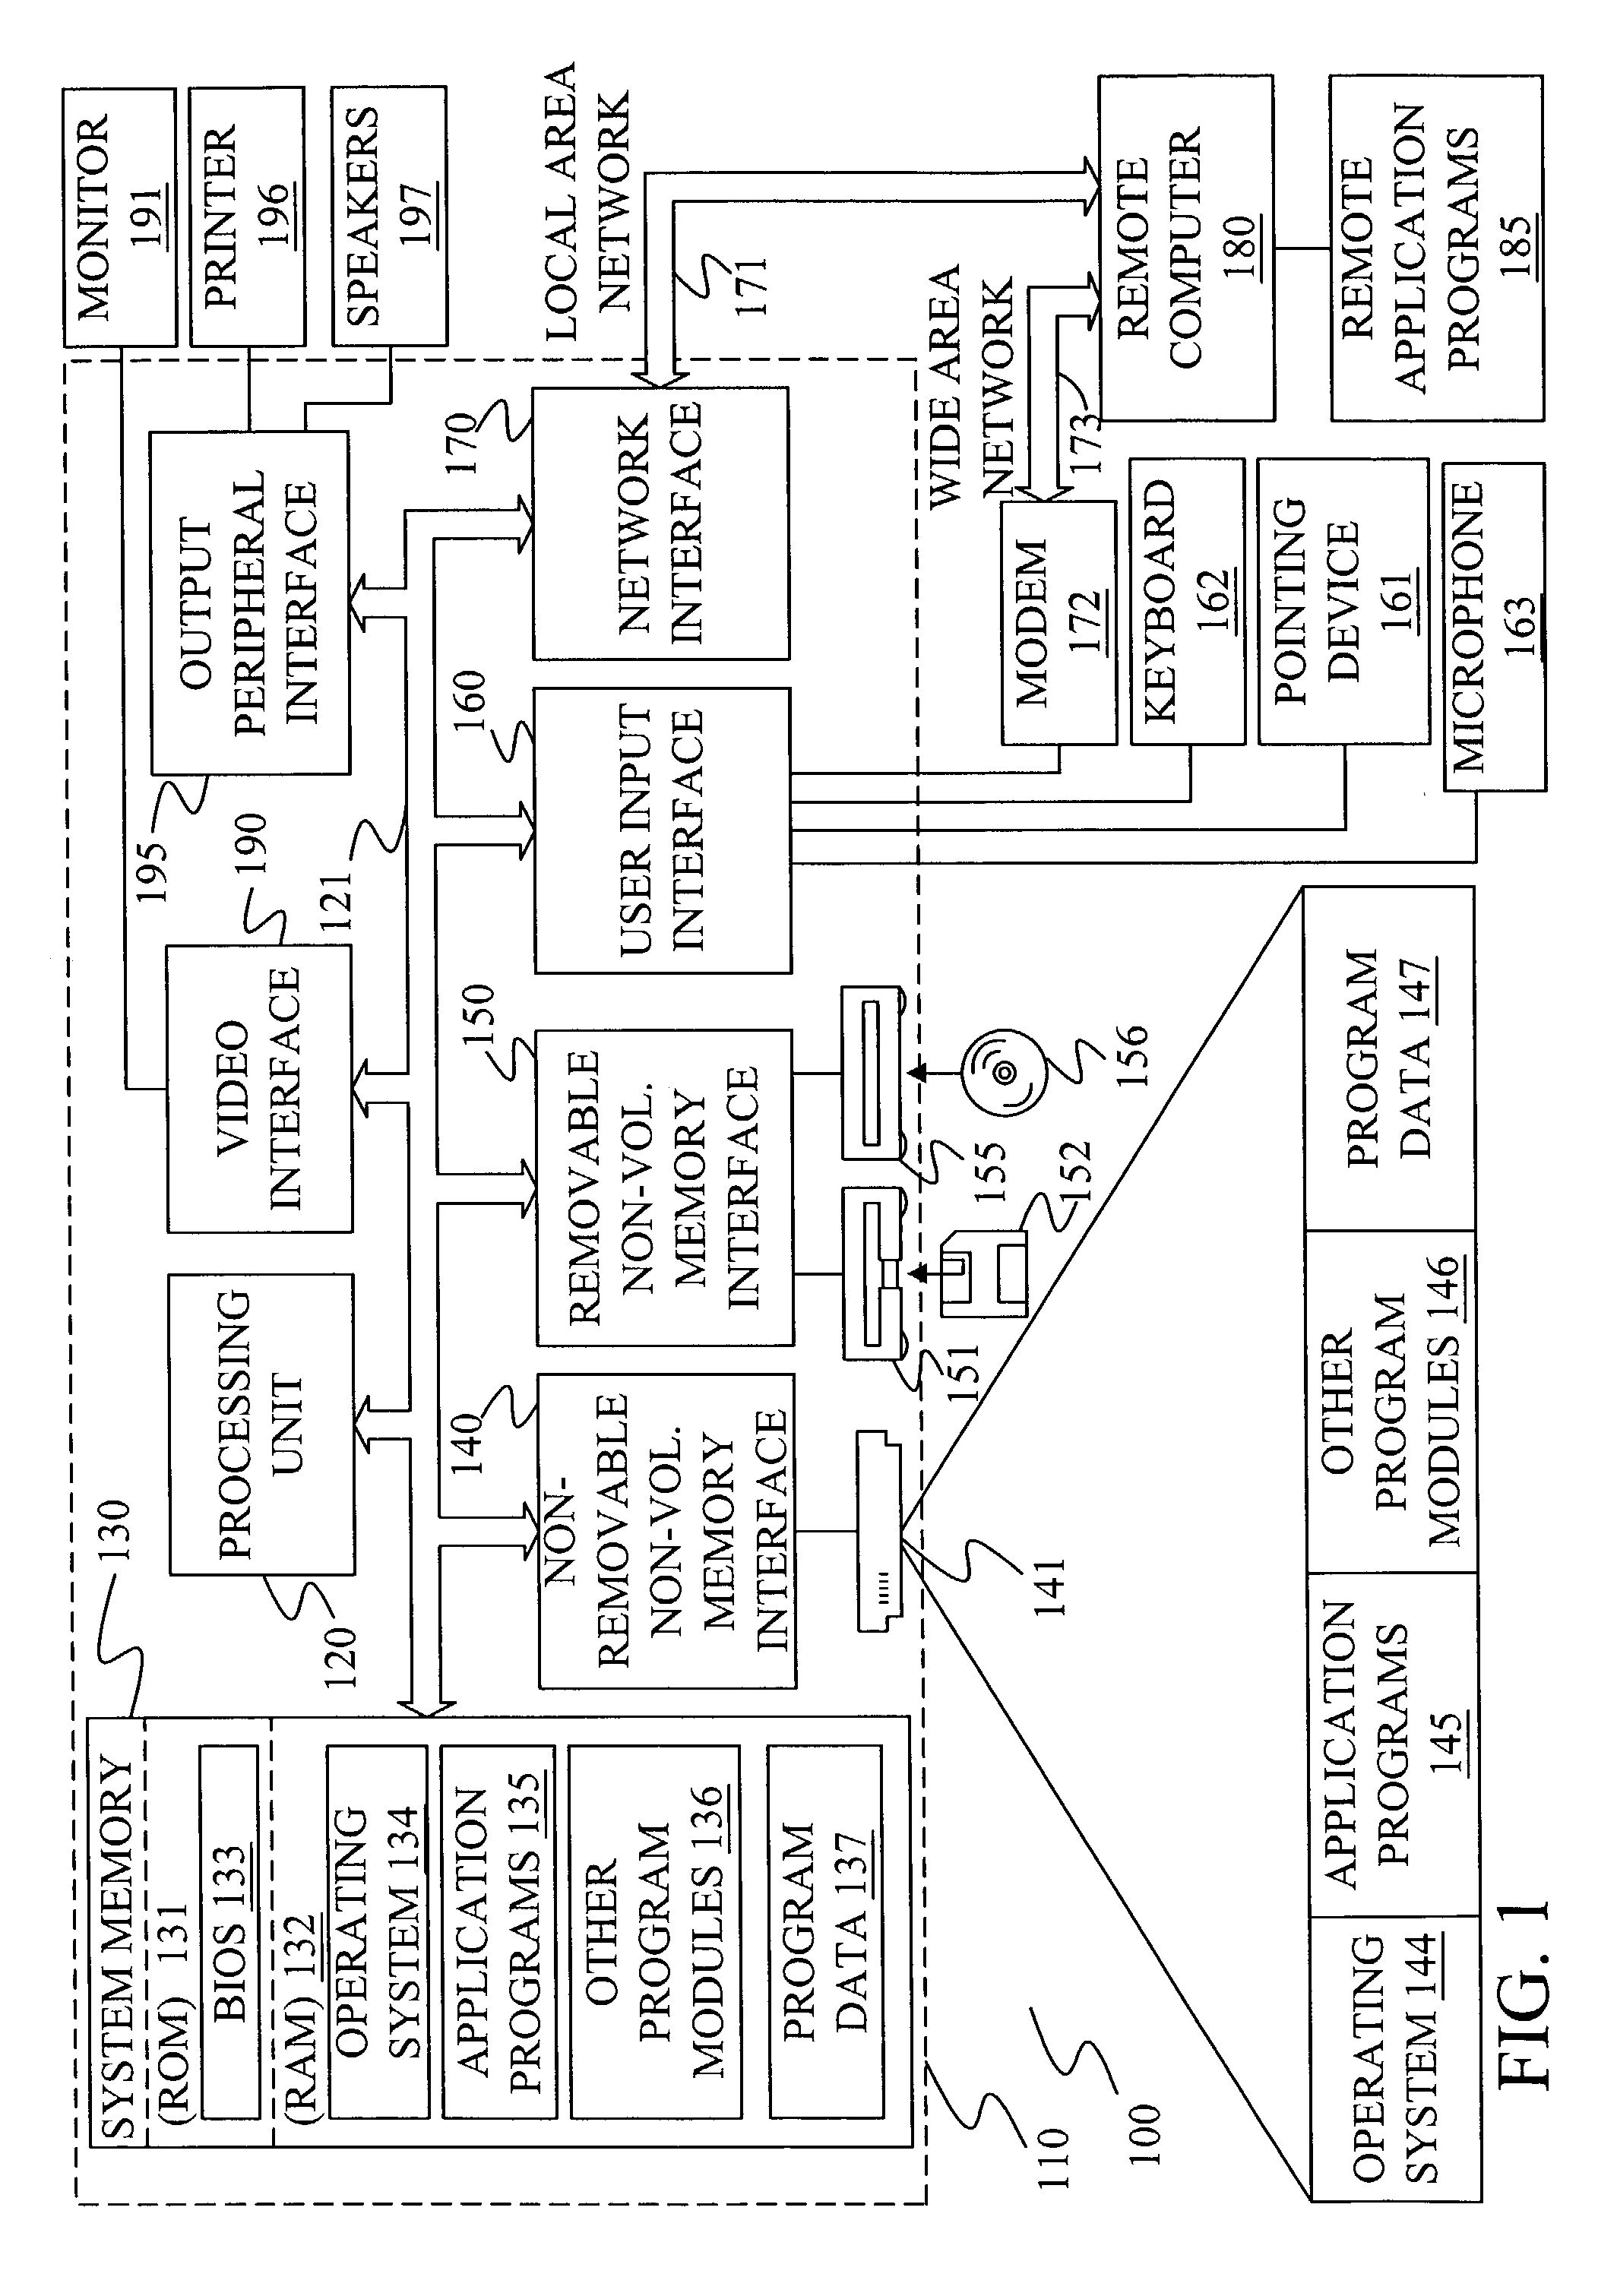 System and method for automatic detection of collocation mistakes in documents